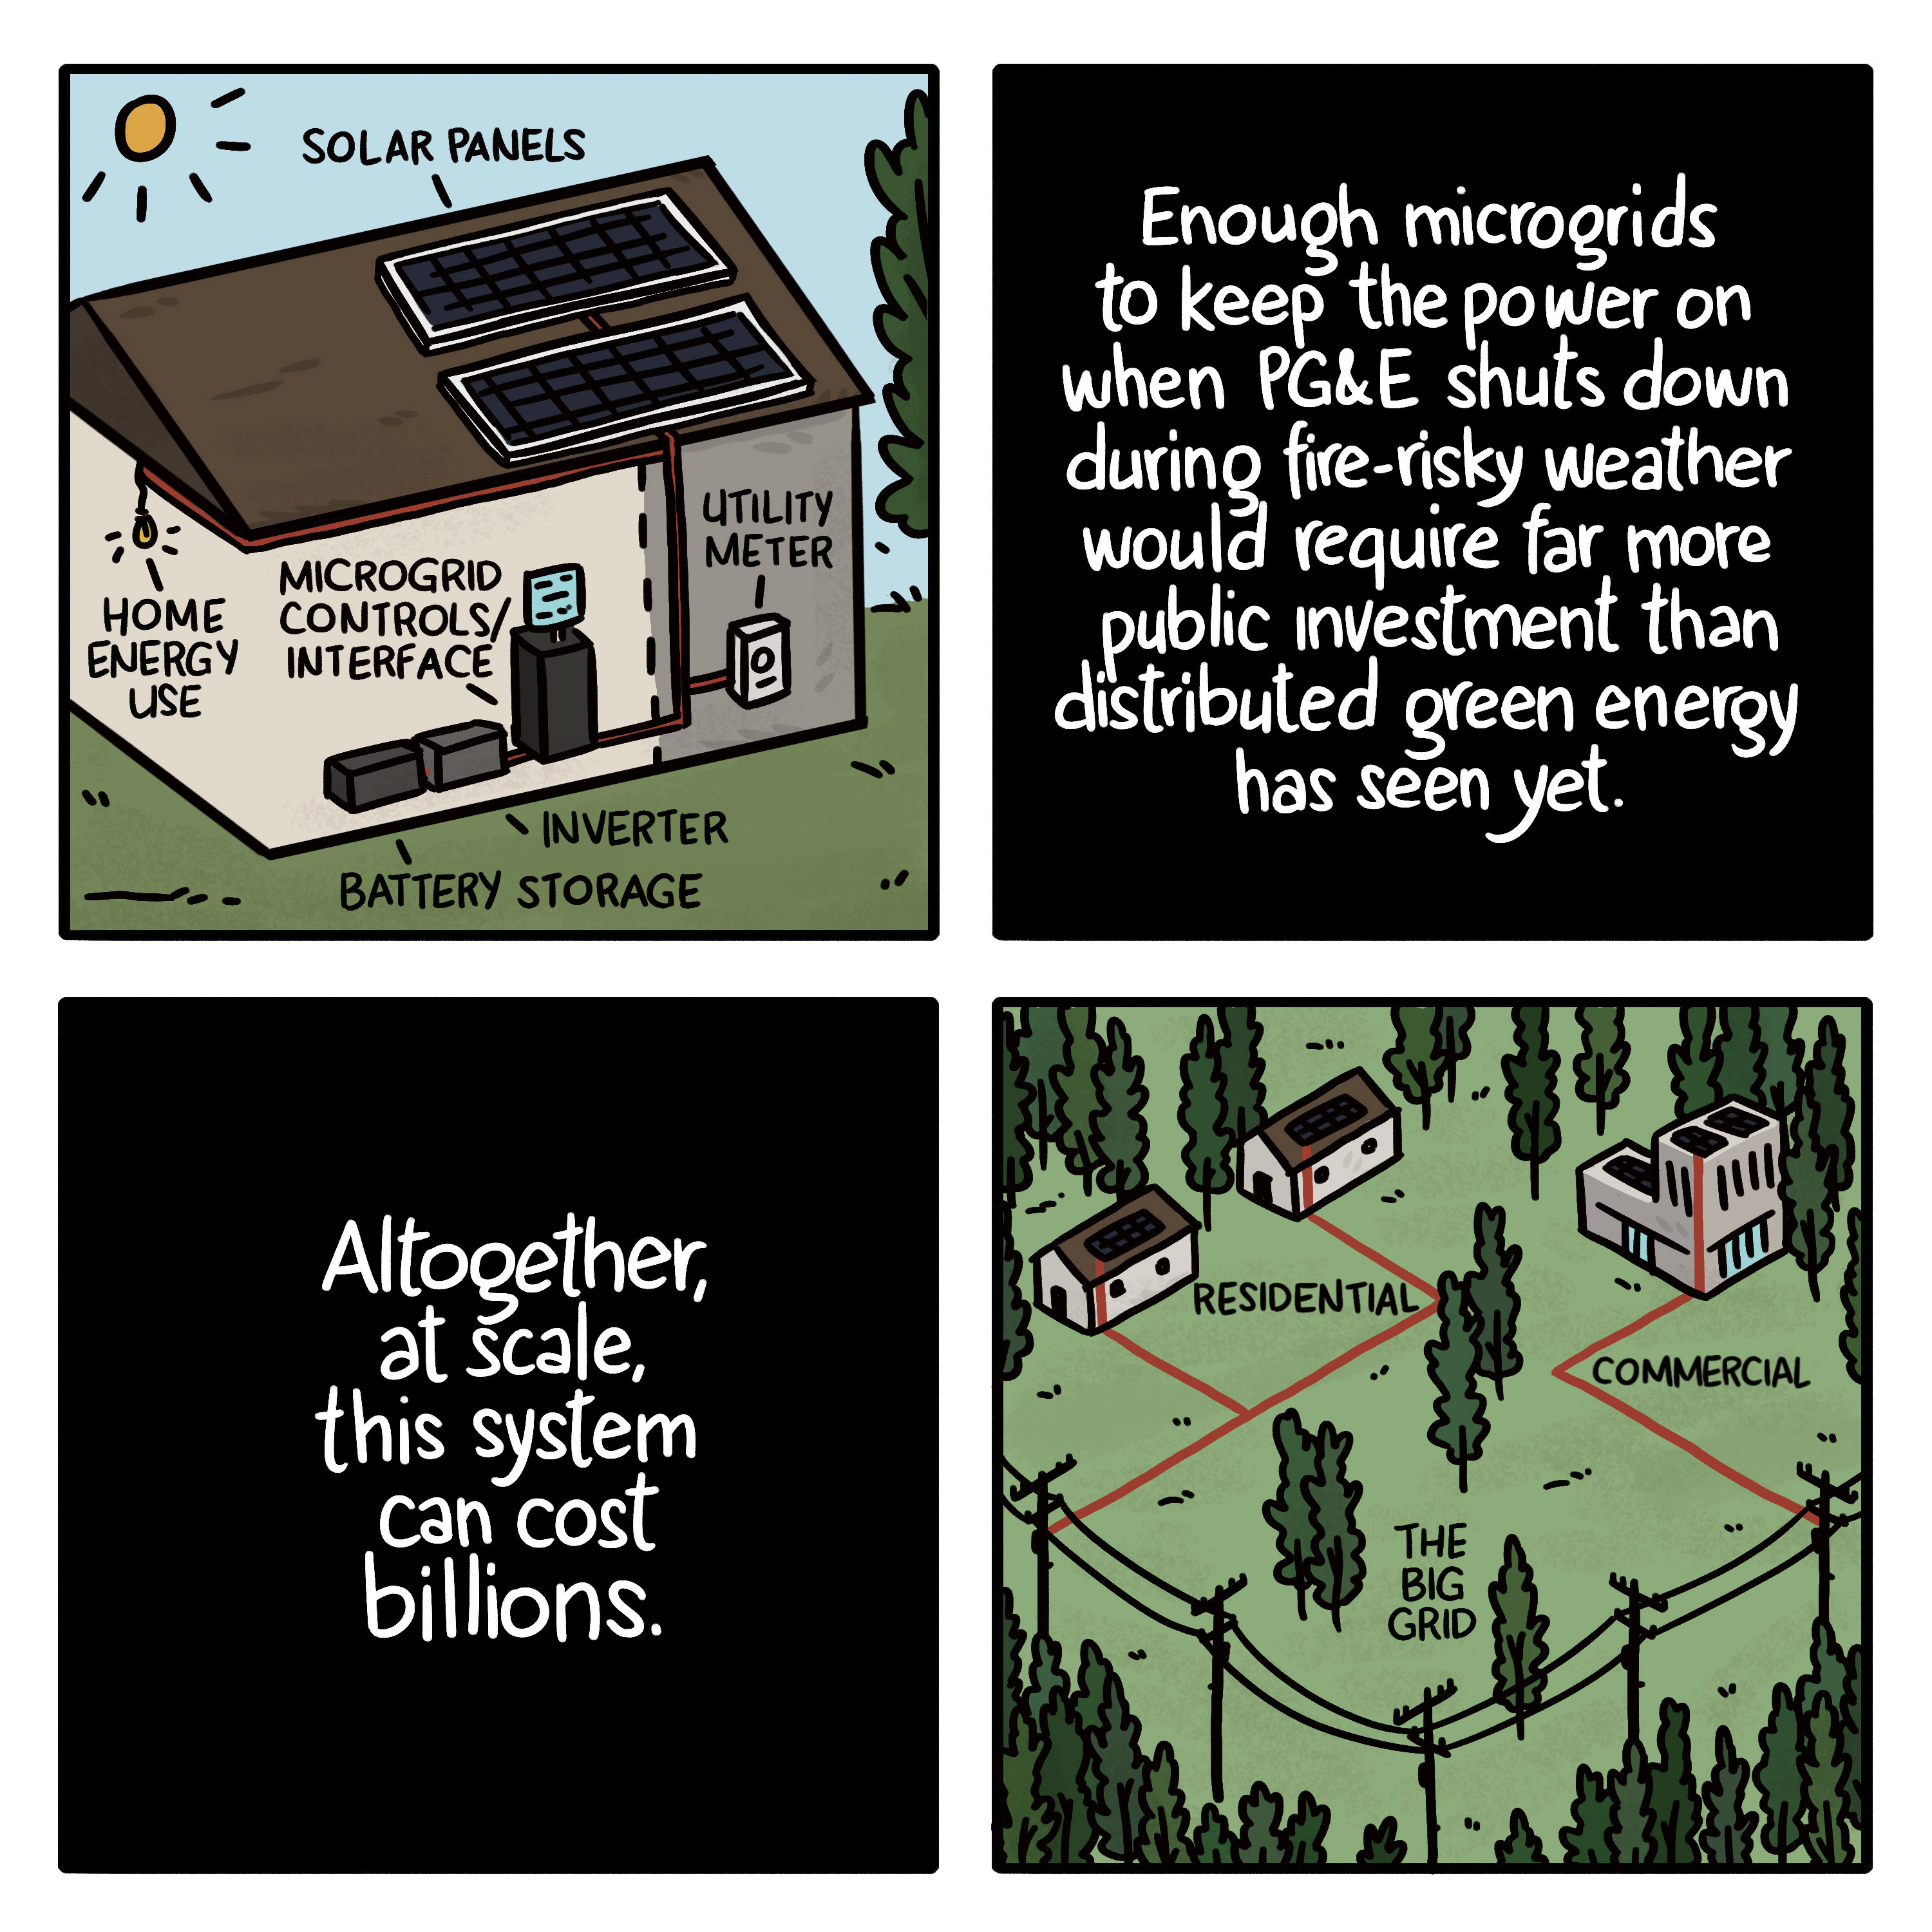 An illustration showing how a solar microgrid works on a single house: Solar panels collect energy, which is used for the house, stored in batteries, and sent back to the grid. If more houses stored power, utilities would have more flexibility in turning off power transmission in high winds, but that could cost billions.